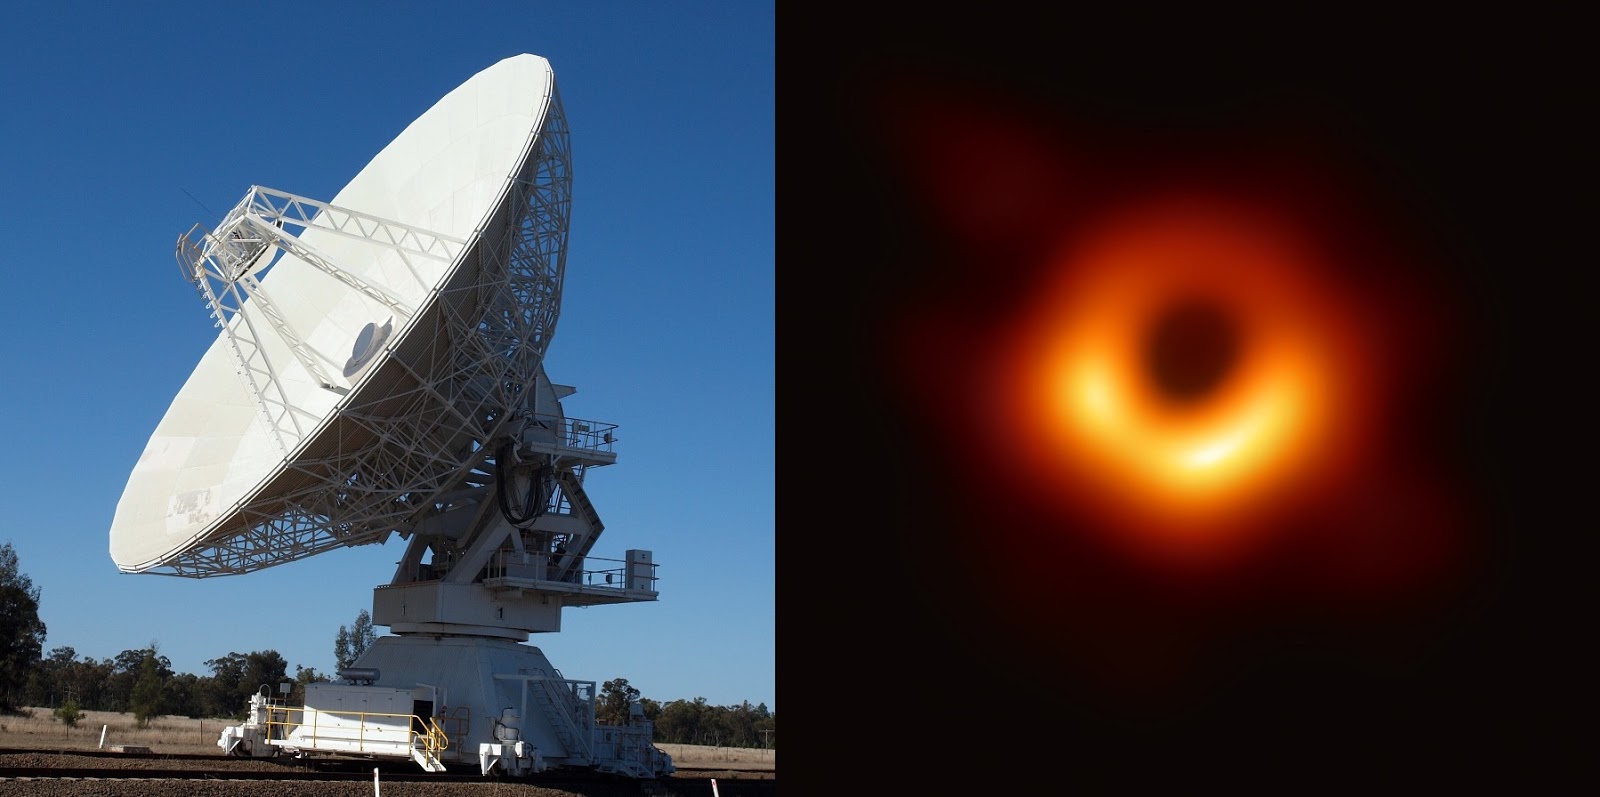 Event Horizon Telescope - Responsible For Capturing the First Ever Image Of A Supermassive Black Hole